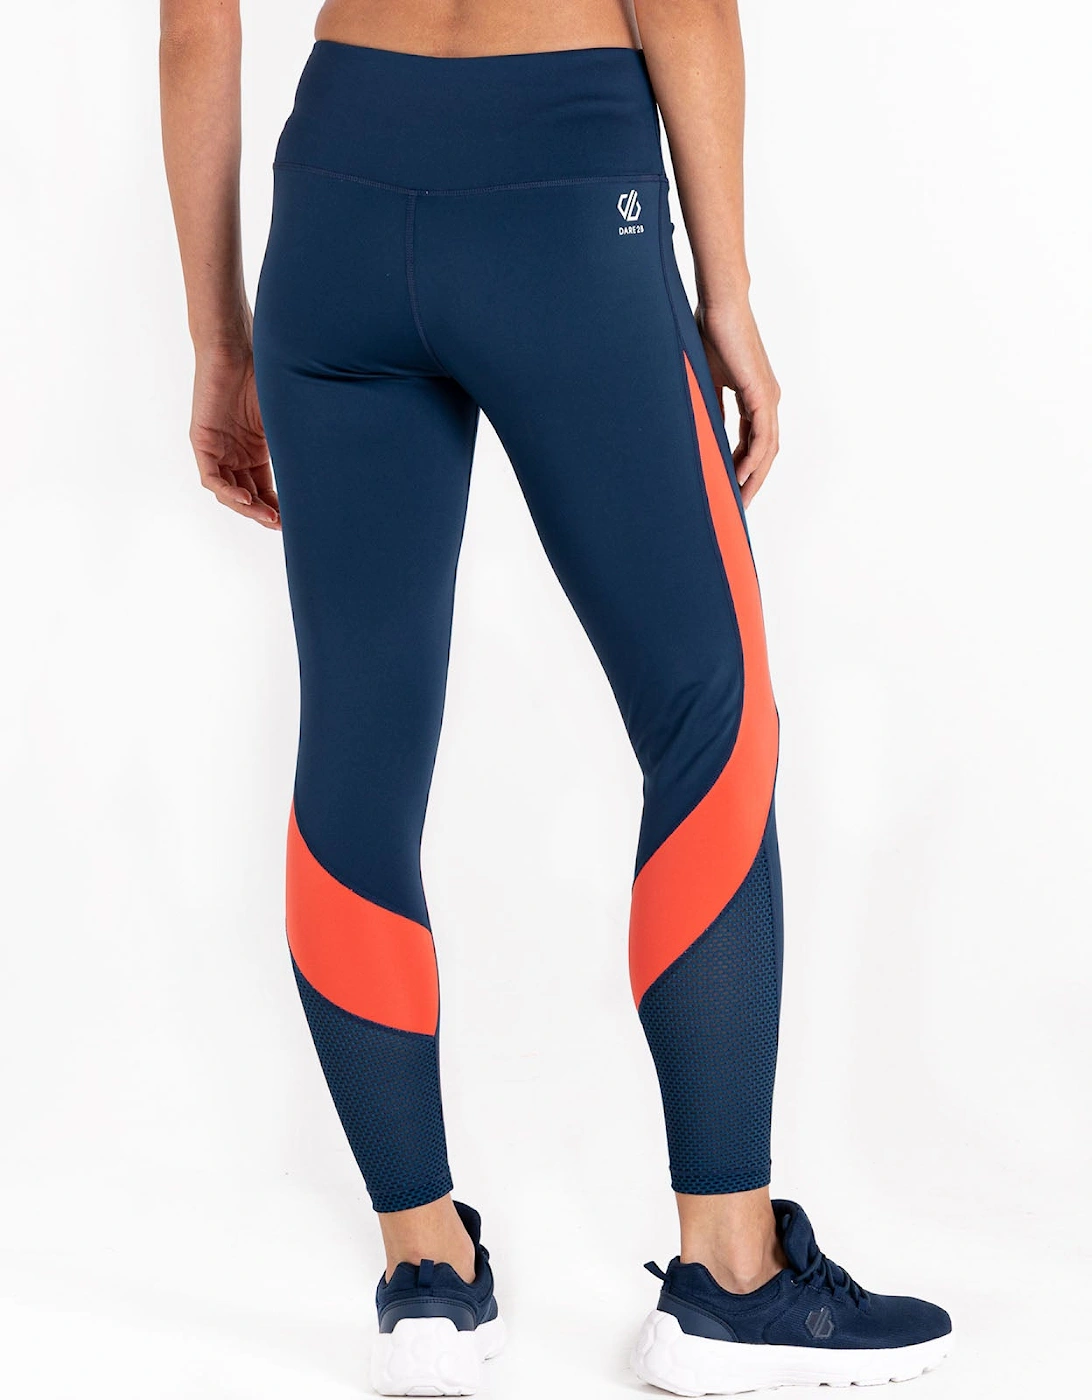 Womens Move Gym Running Sports Activewear Leggings